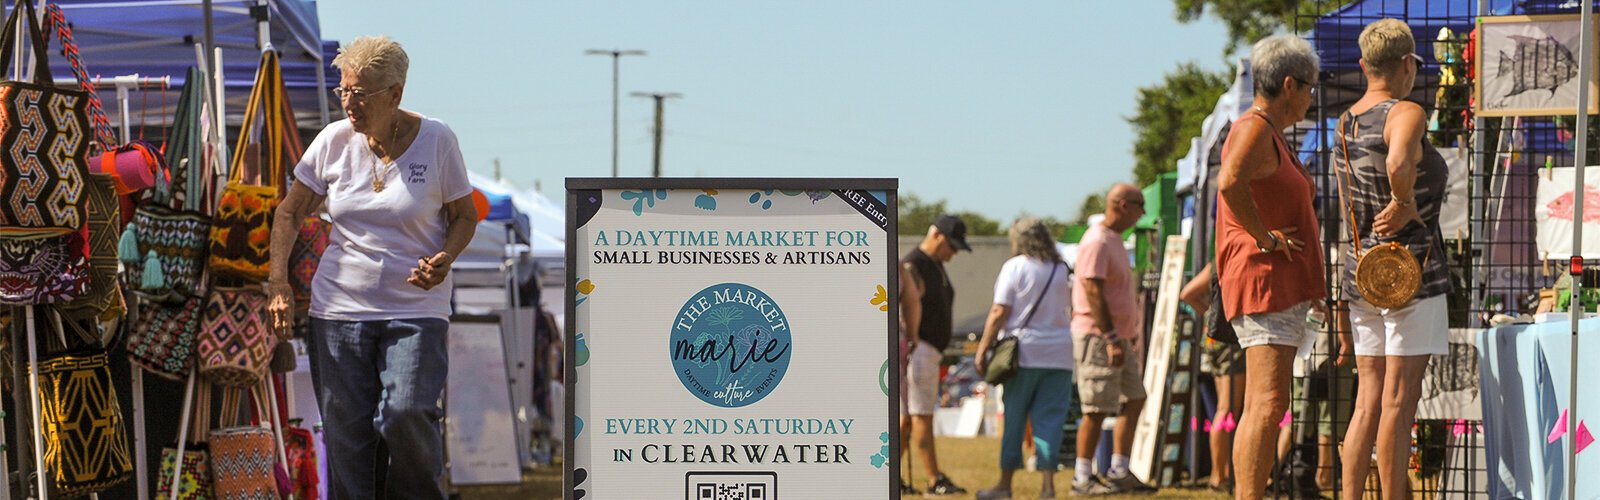 The Market Marie in downtown Clearwater celebrated its one year anniversary Saturday. The market is  held the second Saturday of the month and boasts more than 70 vendors.